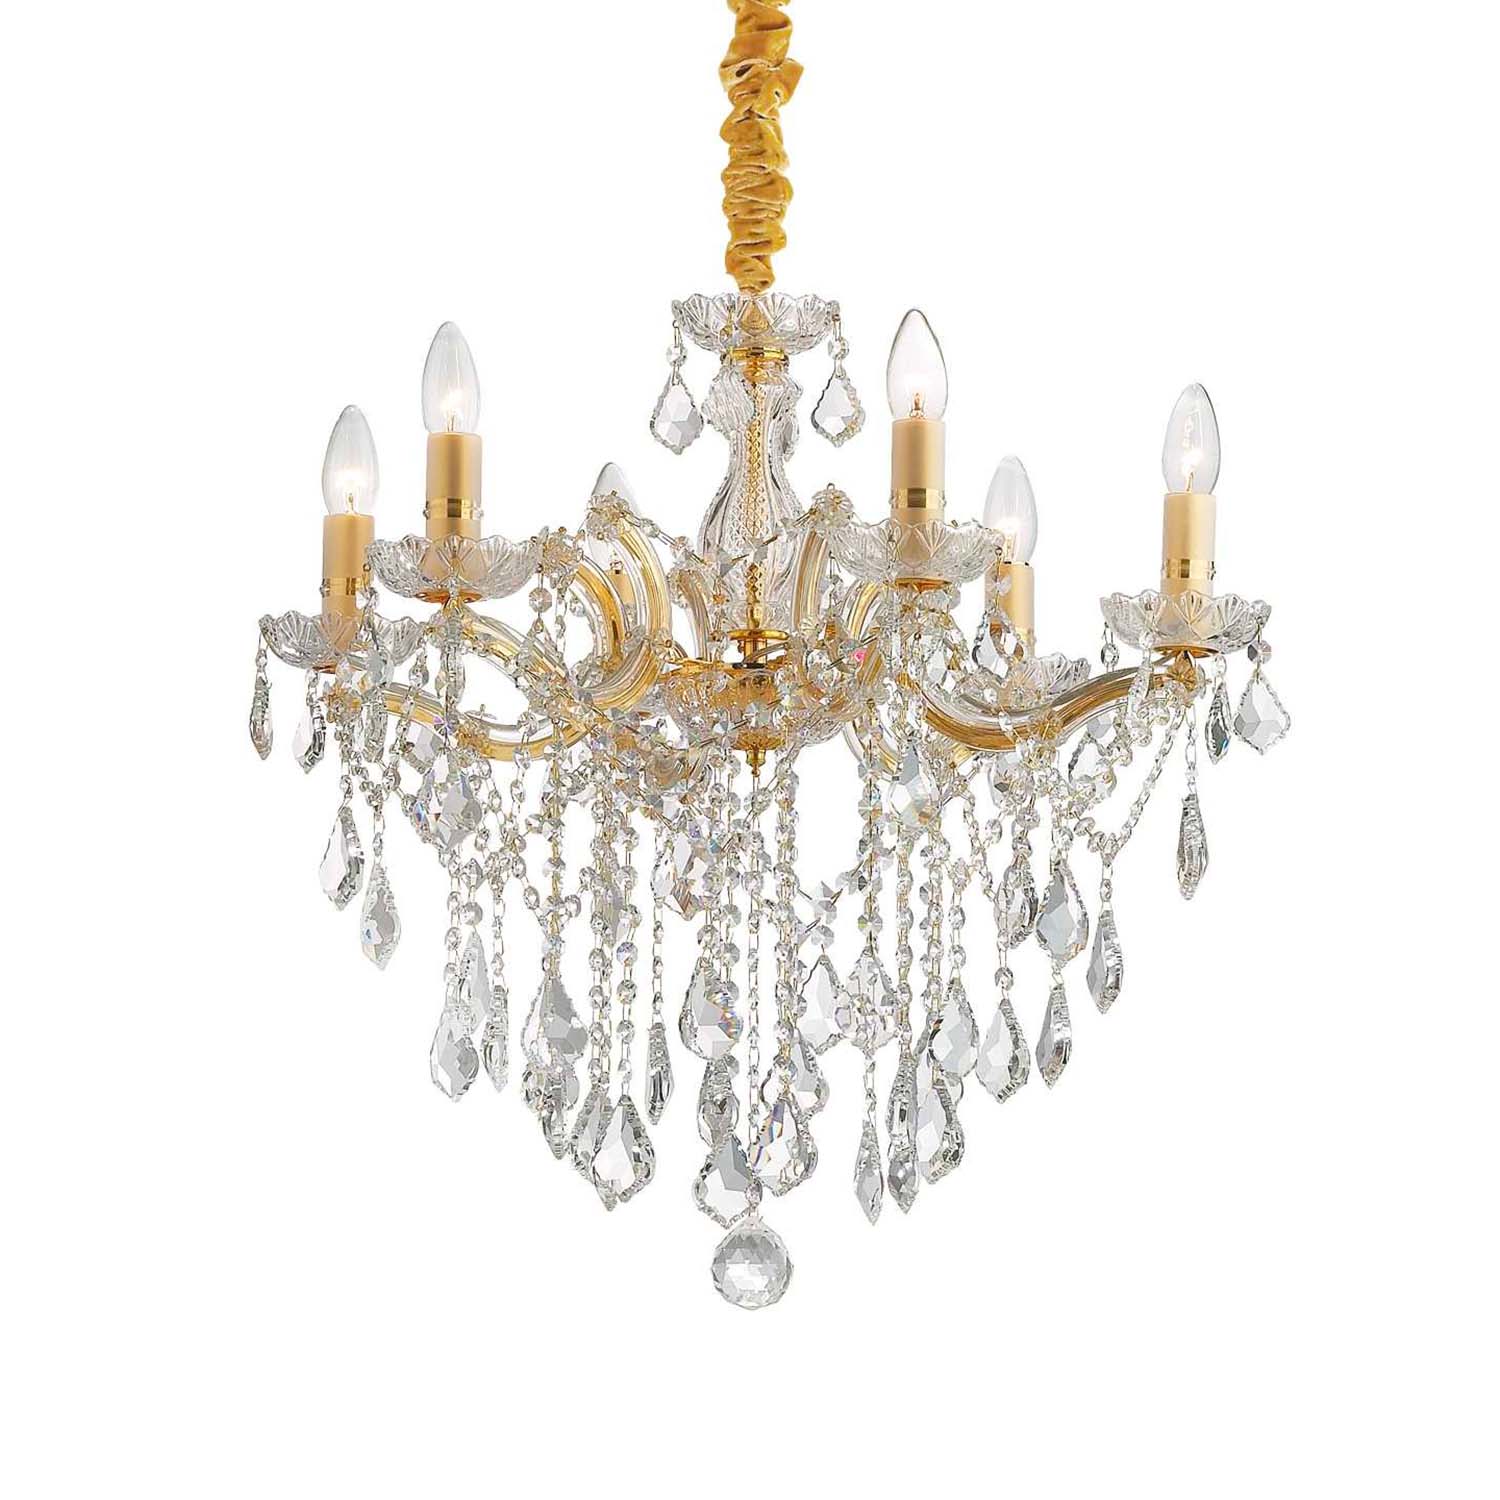 FLORIAN - Chandelier with gold or silver tassels